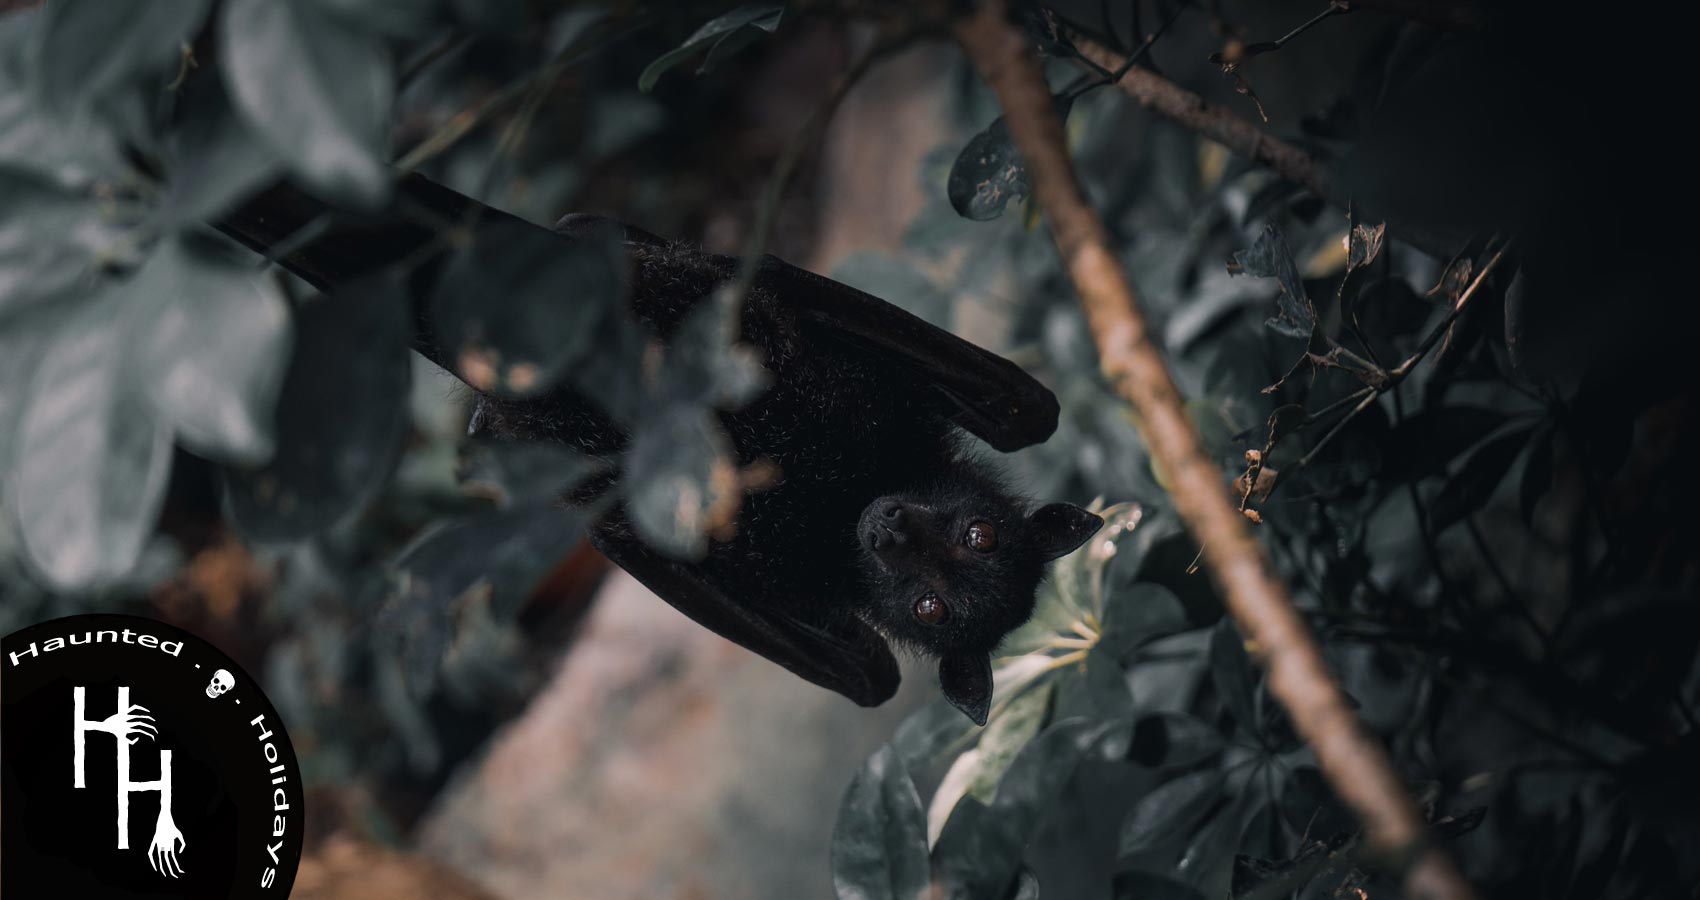 Bats and Their Thoughts, poem by Nishand Venugopal at Spillwords.com